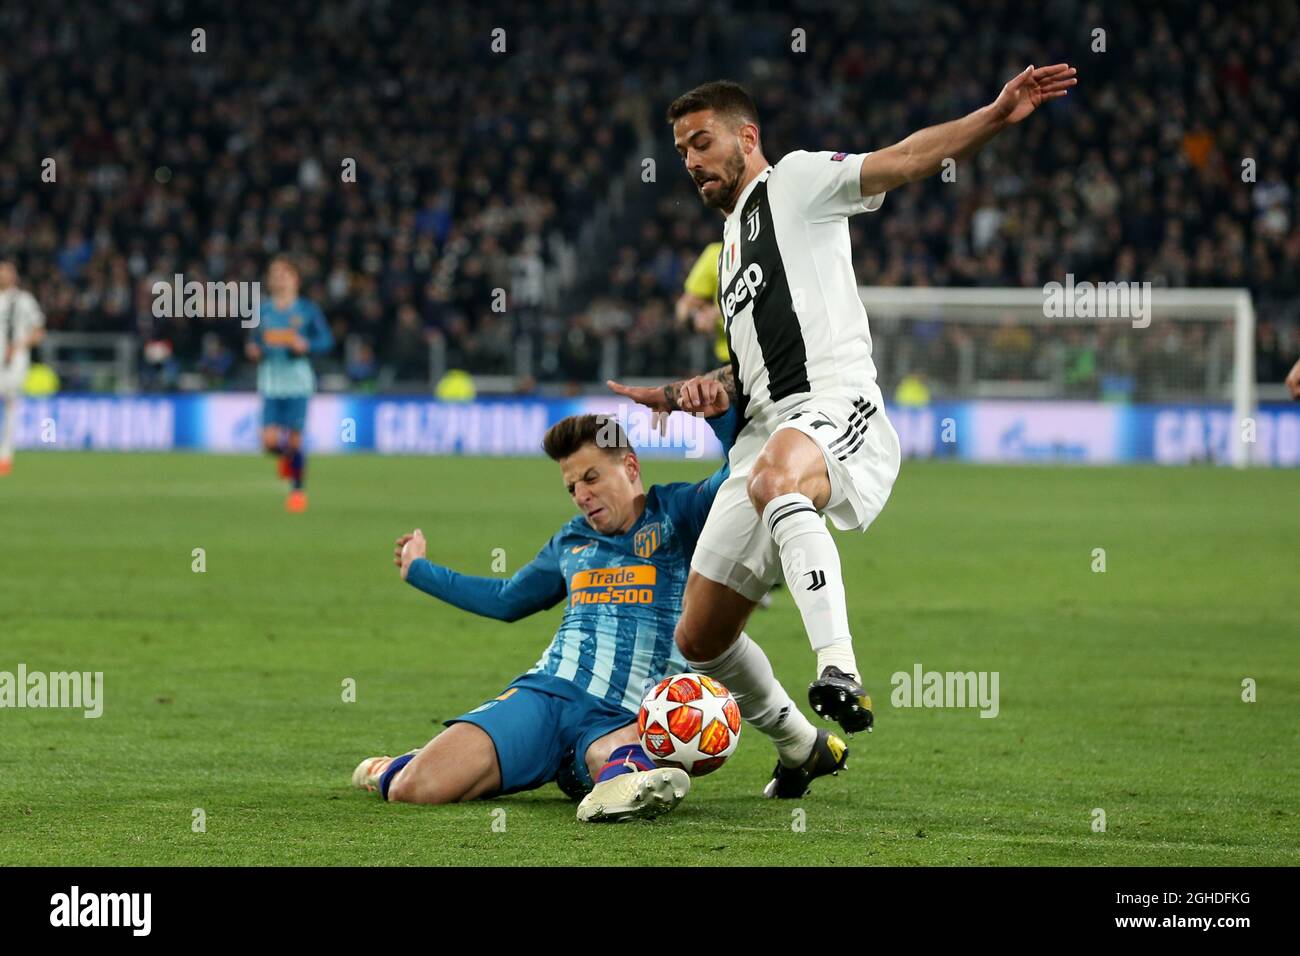 Leonardo Spinazzola of Juventus and Santiago Arias of Atletico Madrid during the UEFA Champions League Round of 16 match at the Allianz Stadium, Turin, Italy. Picture date 12th March 2019. Picture credit should read: Jonathan Moscrop/Sportimage via PA Images Stock Photo